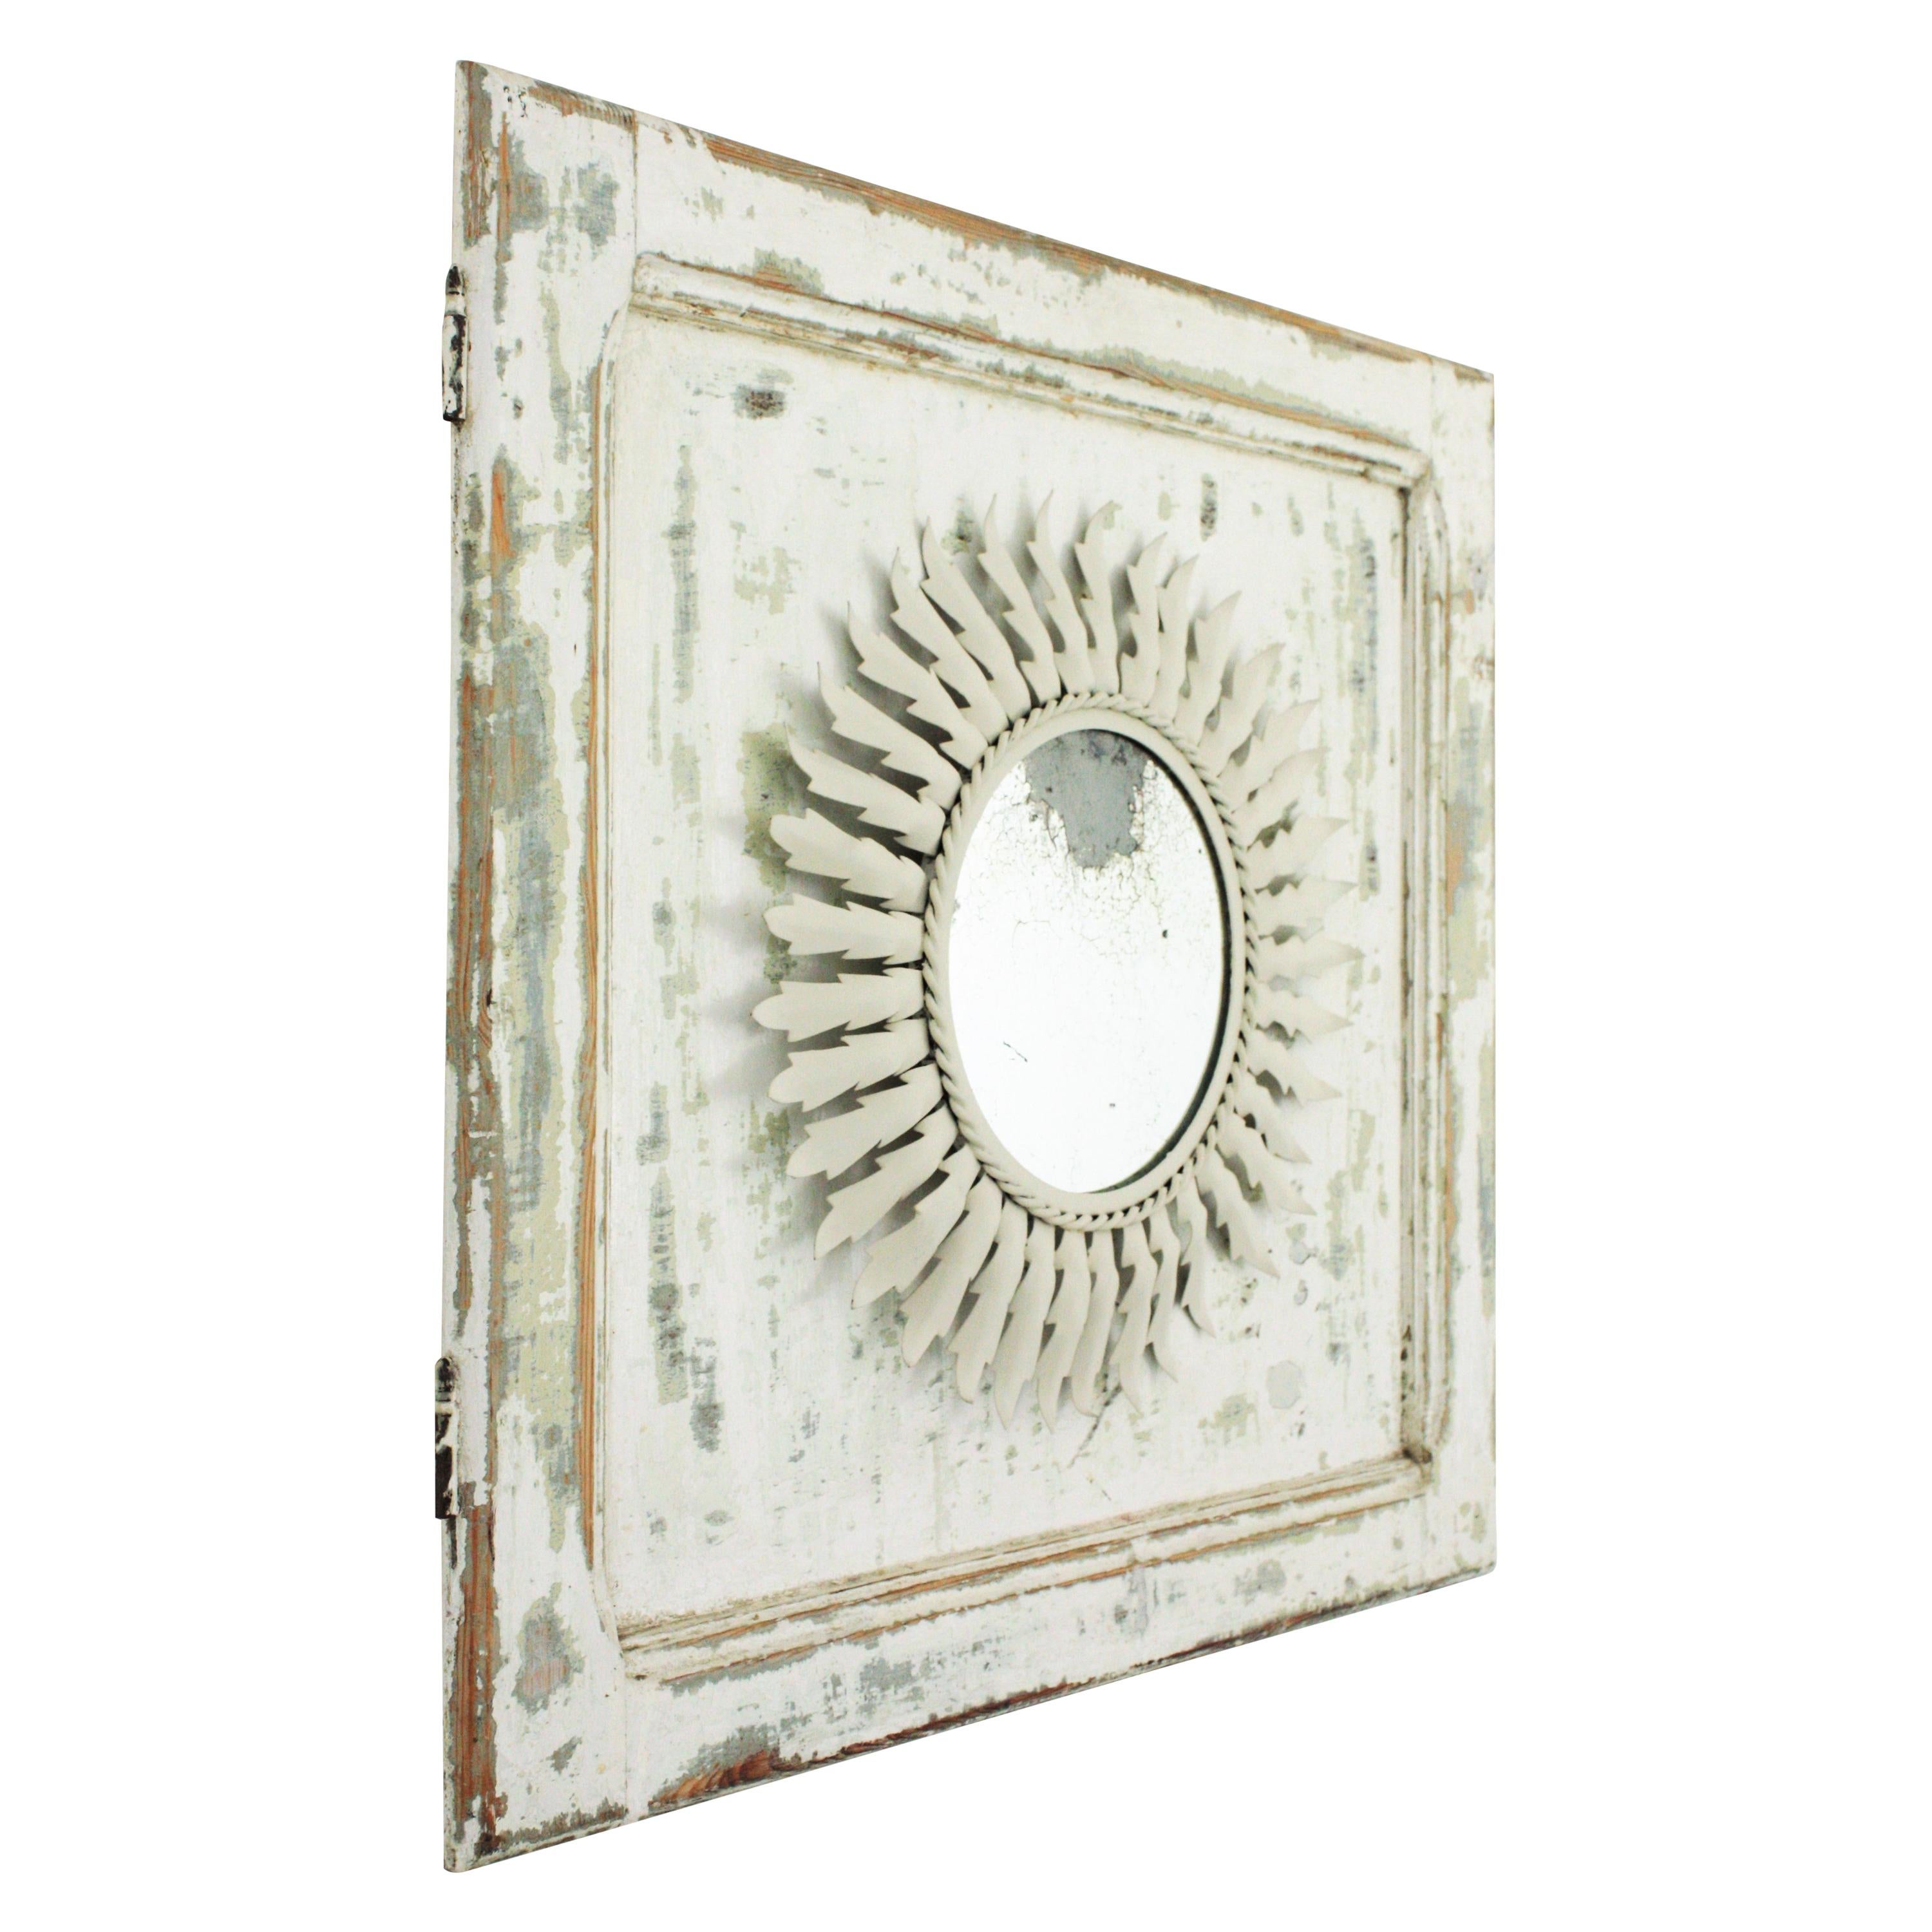 Eye-catching Trumeau mirror composition with a white patinated sunburst mirror framed by an antique painted door, Spain, 1960s
The door has its original painting and a nice aged patina showing different coats of paint.
This wall mirror will be a